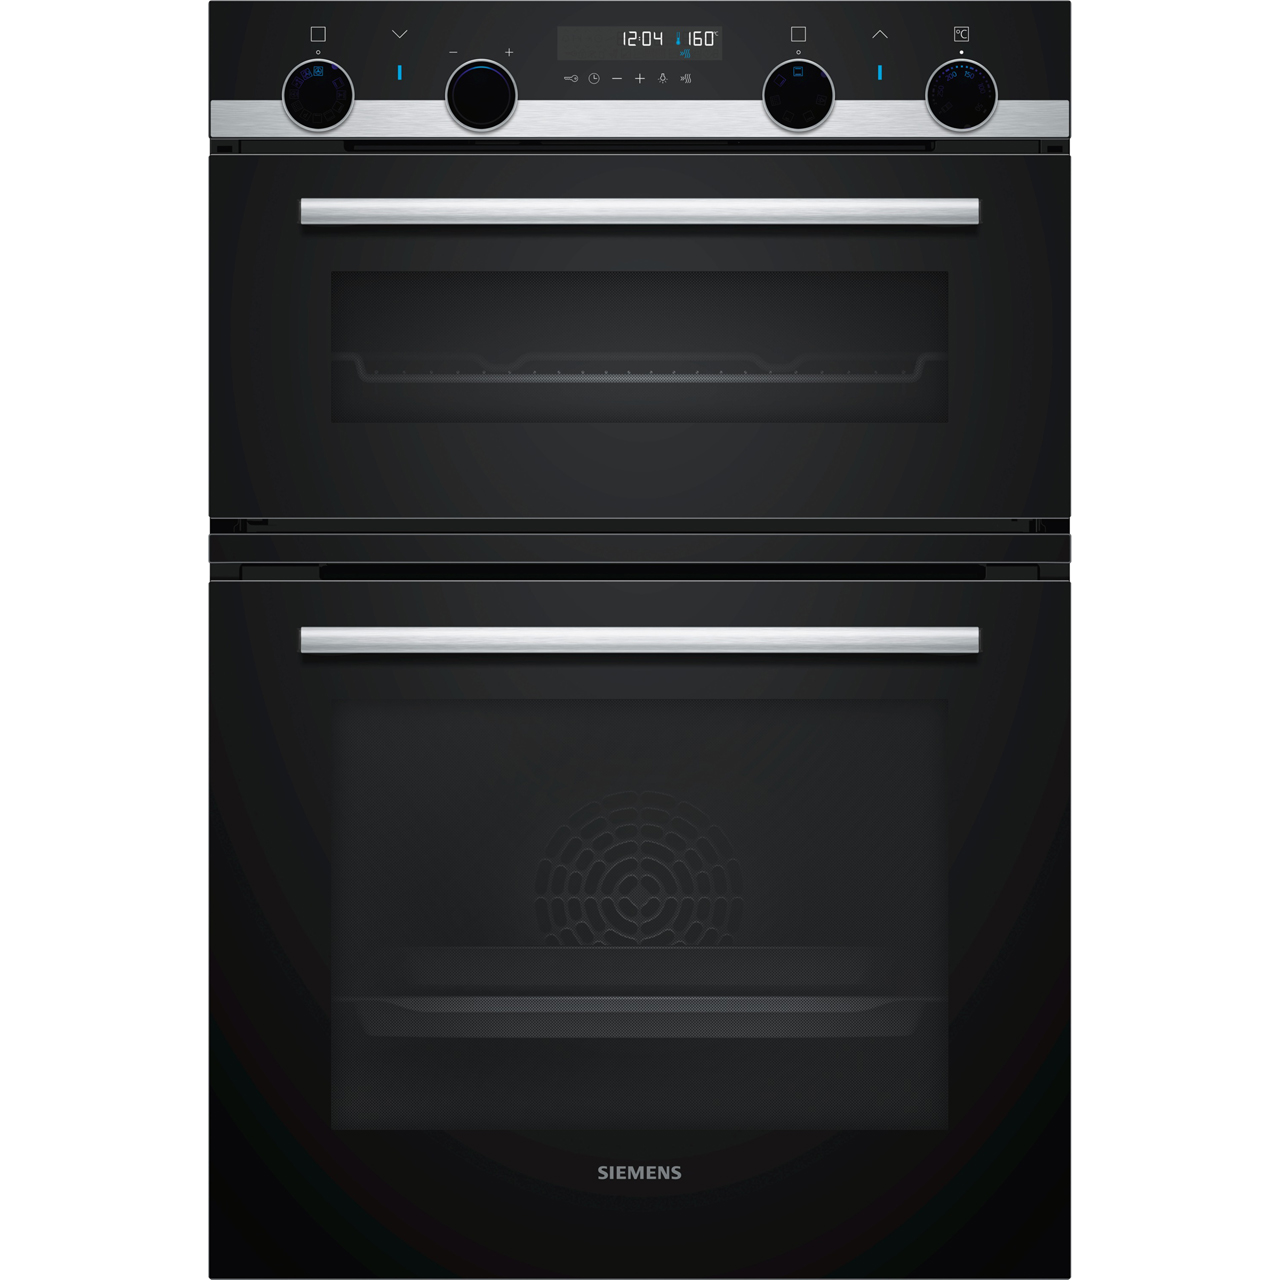 Siemens IQ-500 MB578G5S0B Built In Double Oven Review